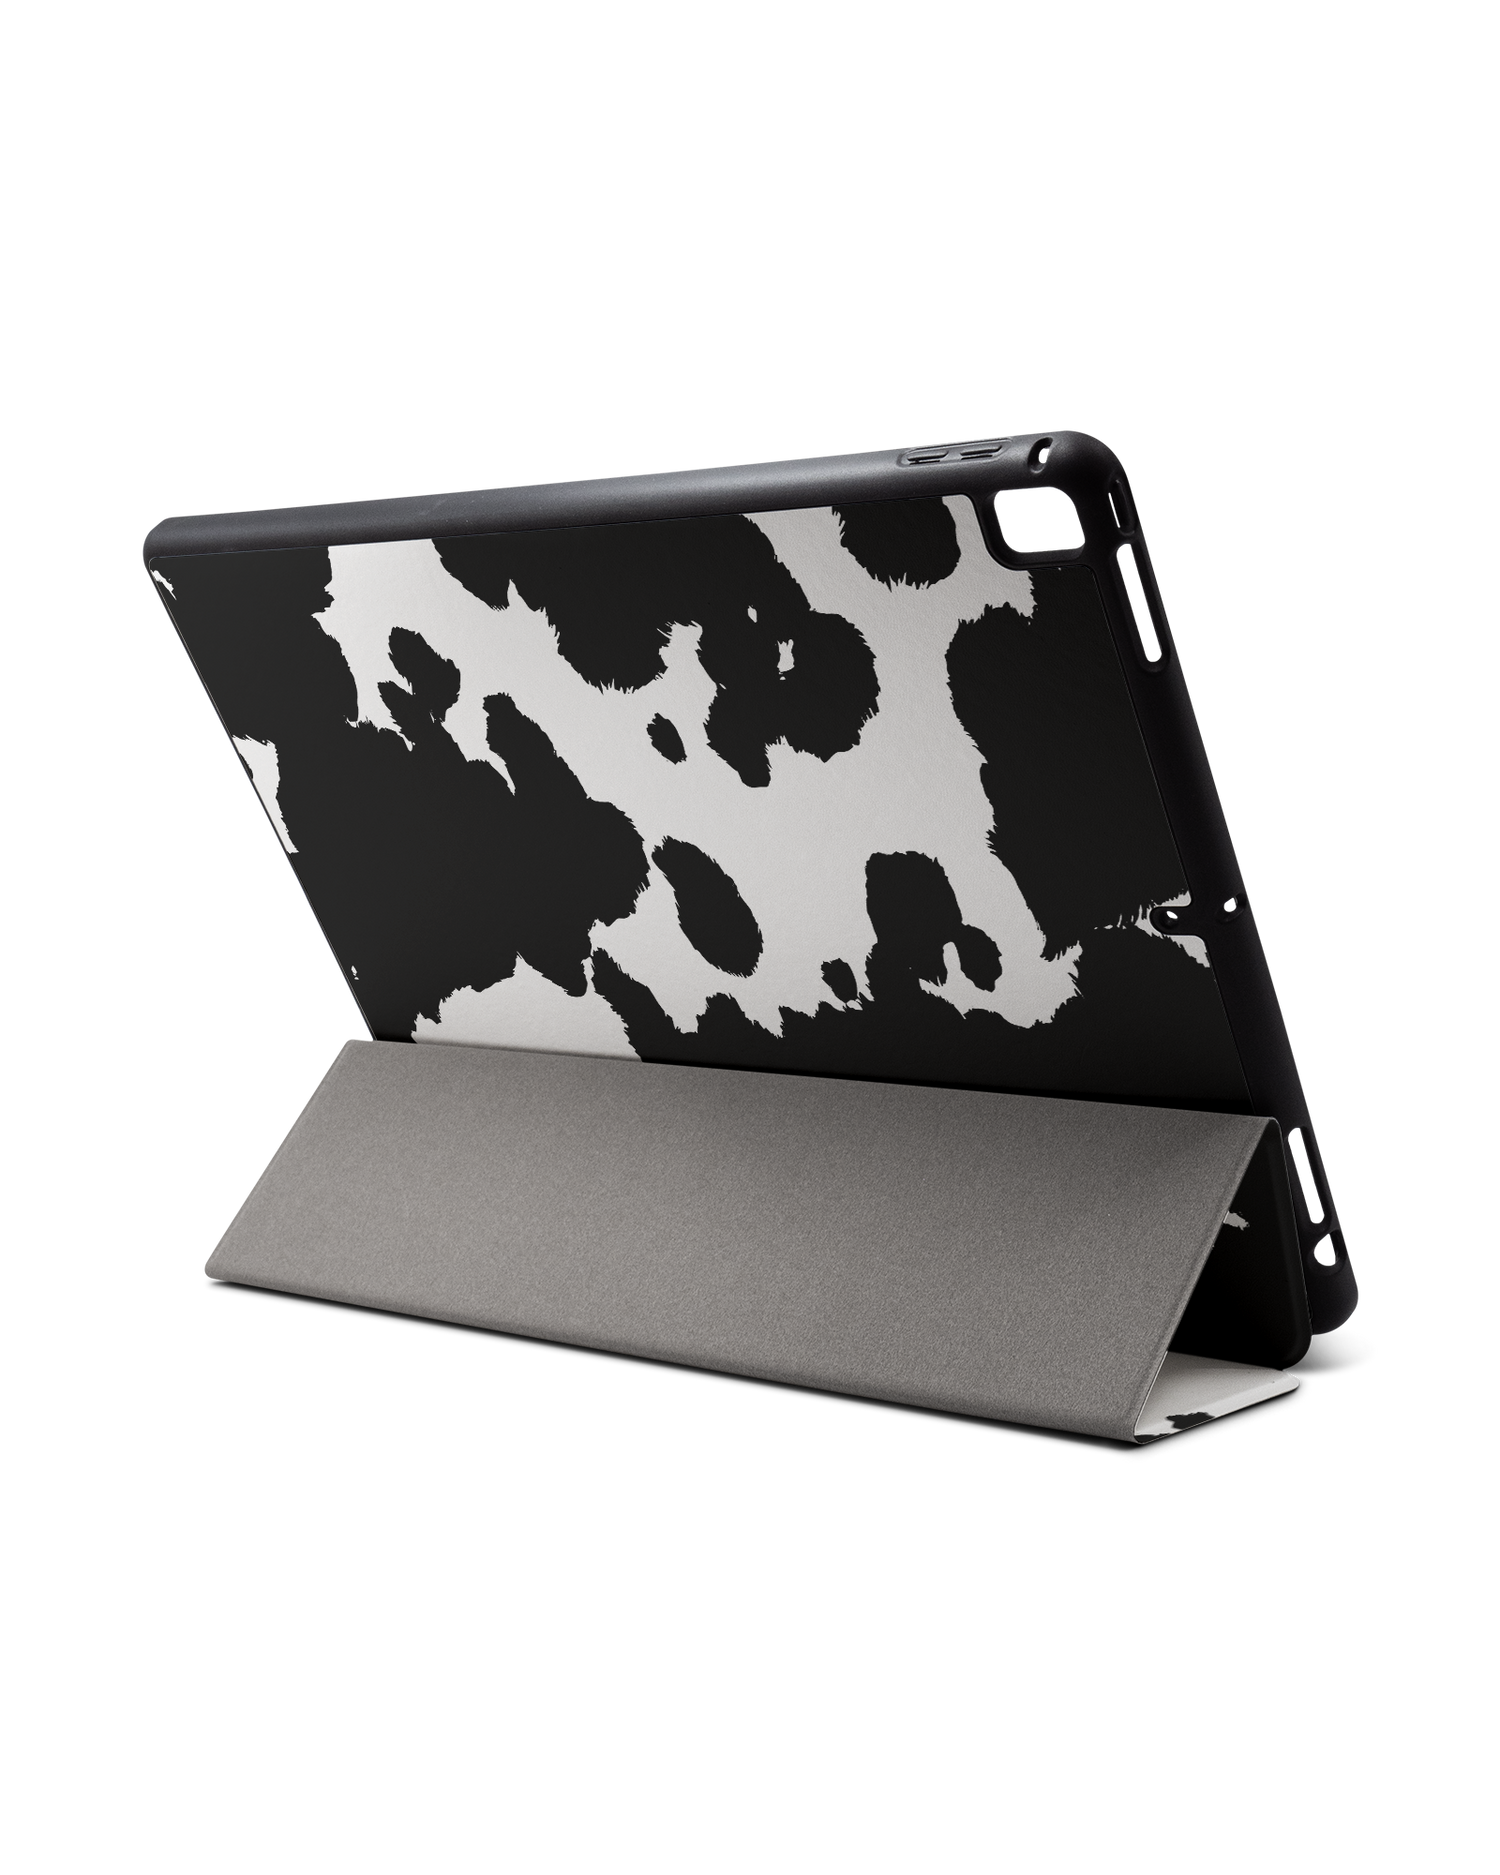 Cow Print iPad Case with Pencil Holder for Apple iPad Pro 2 12.9